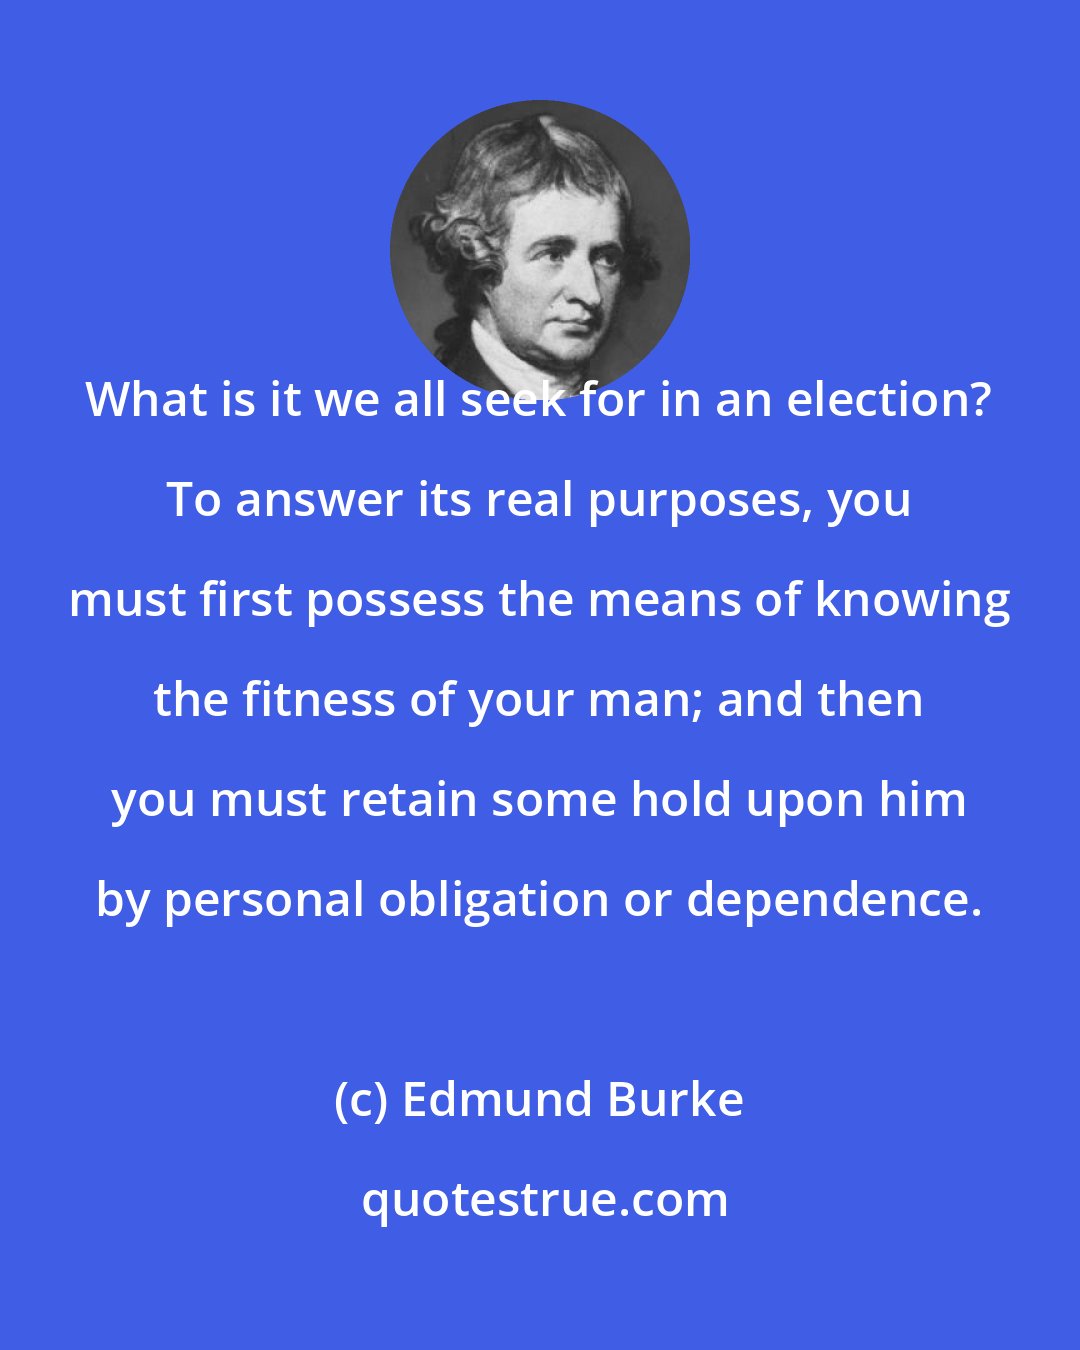 Edmund Burke: What is it we all seek for in an election? To answer its real purposes, you must first possess the means of knowing the fitness of your man; and then you must retain some hold upon him by personal obligation or dependence.